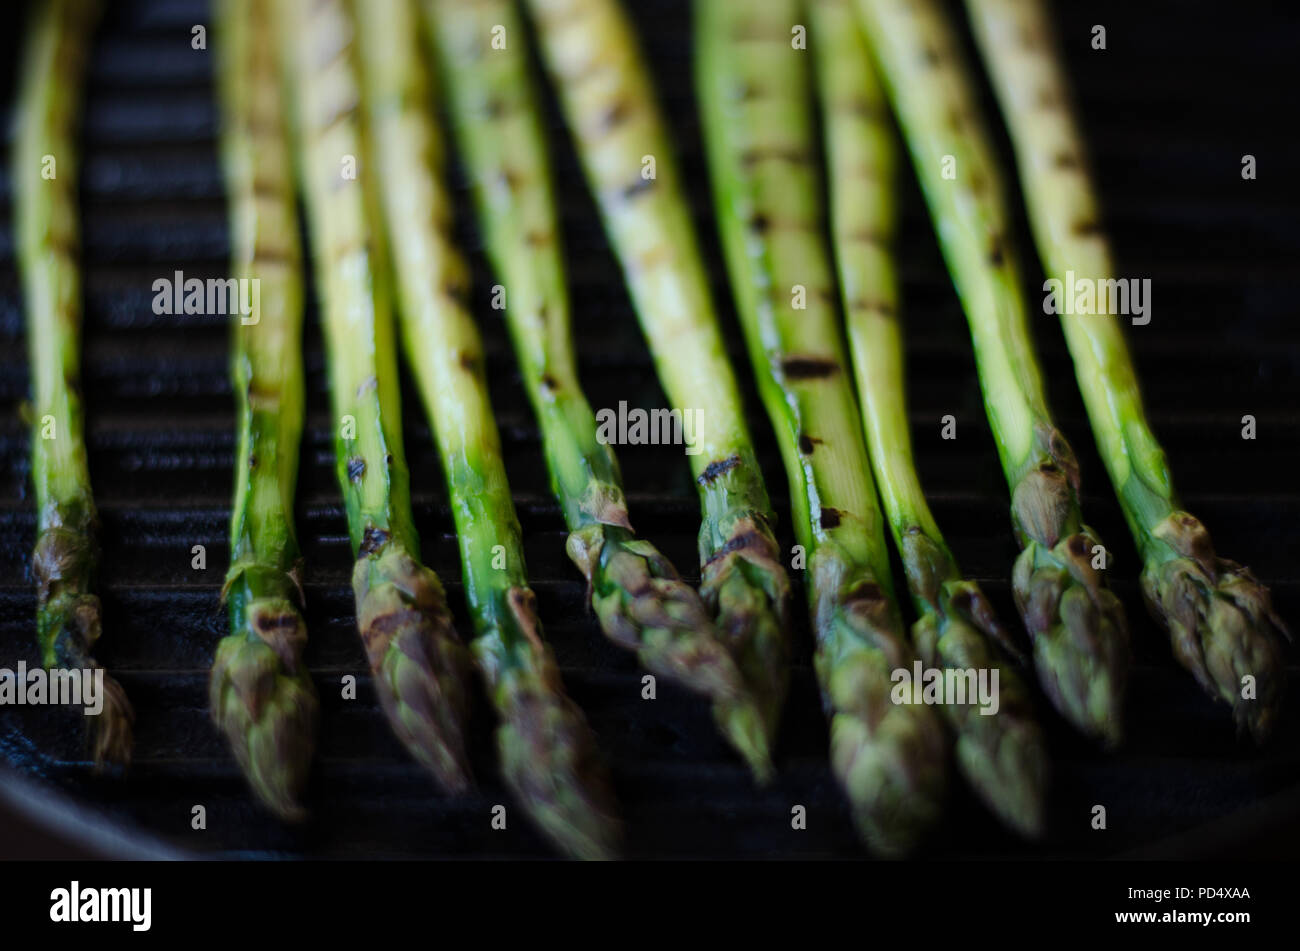 Grilled green asparagus on a cast iron grillpan Stock Photo